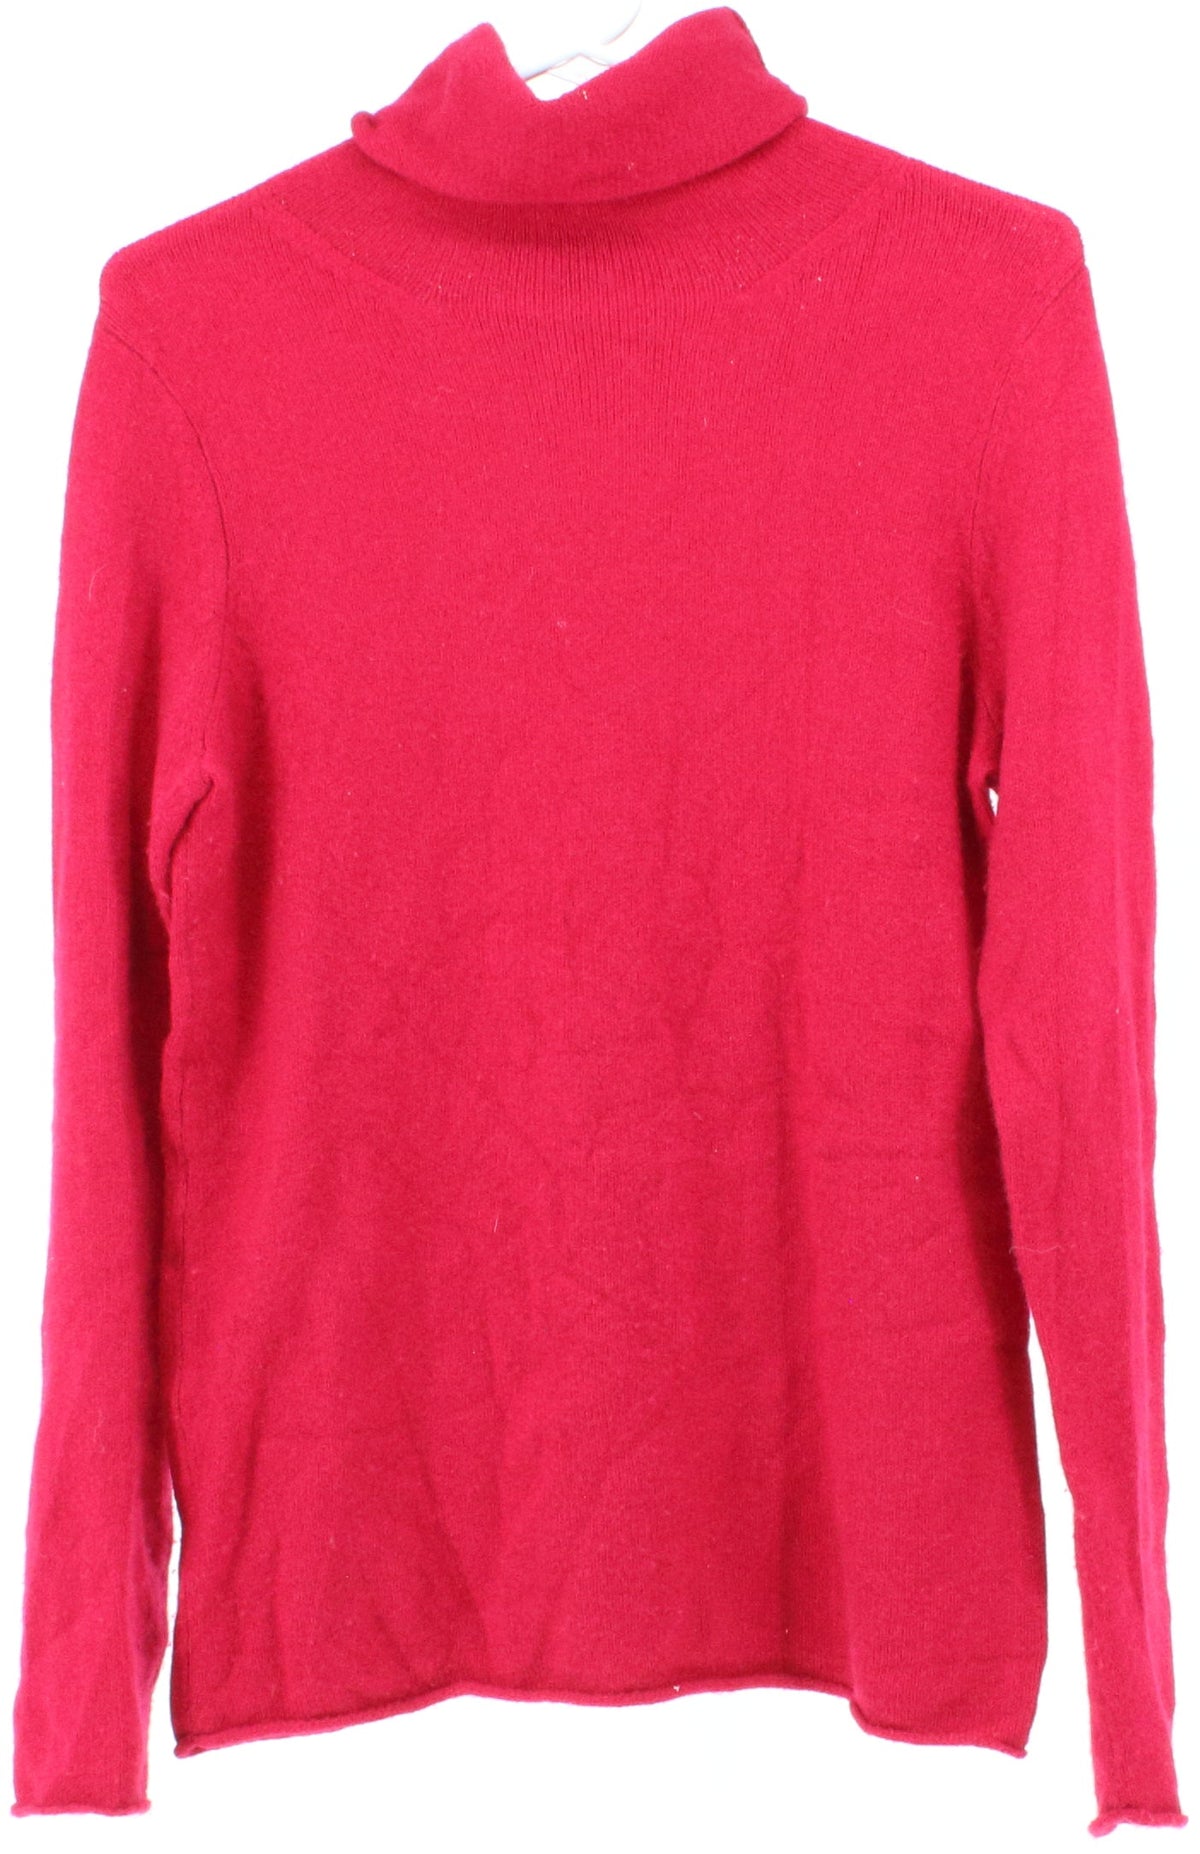 Ann Taylor Red Turtleneck Women's Cashmere Sweater